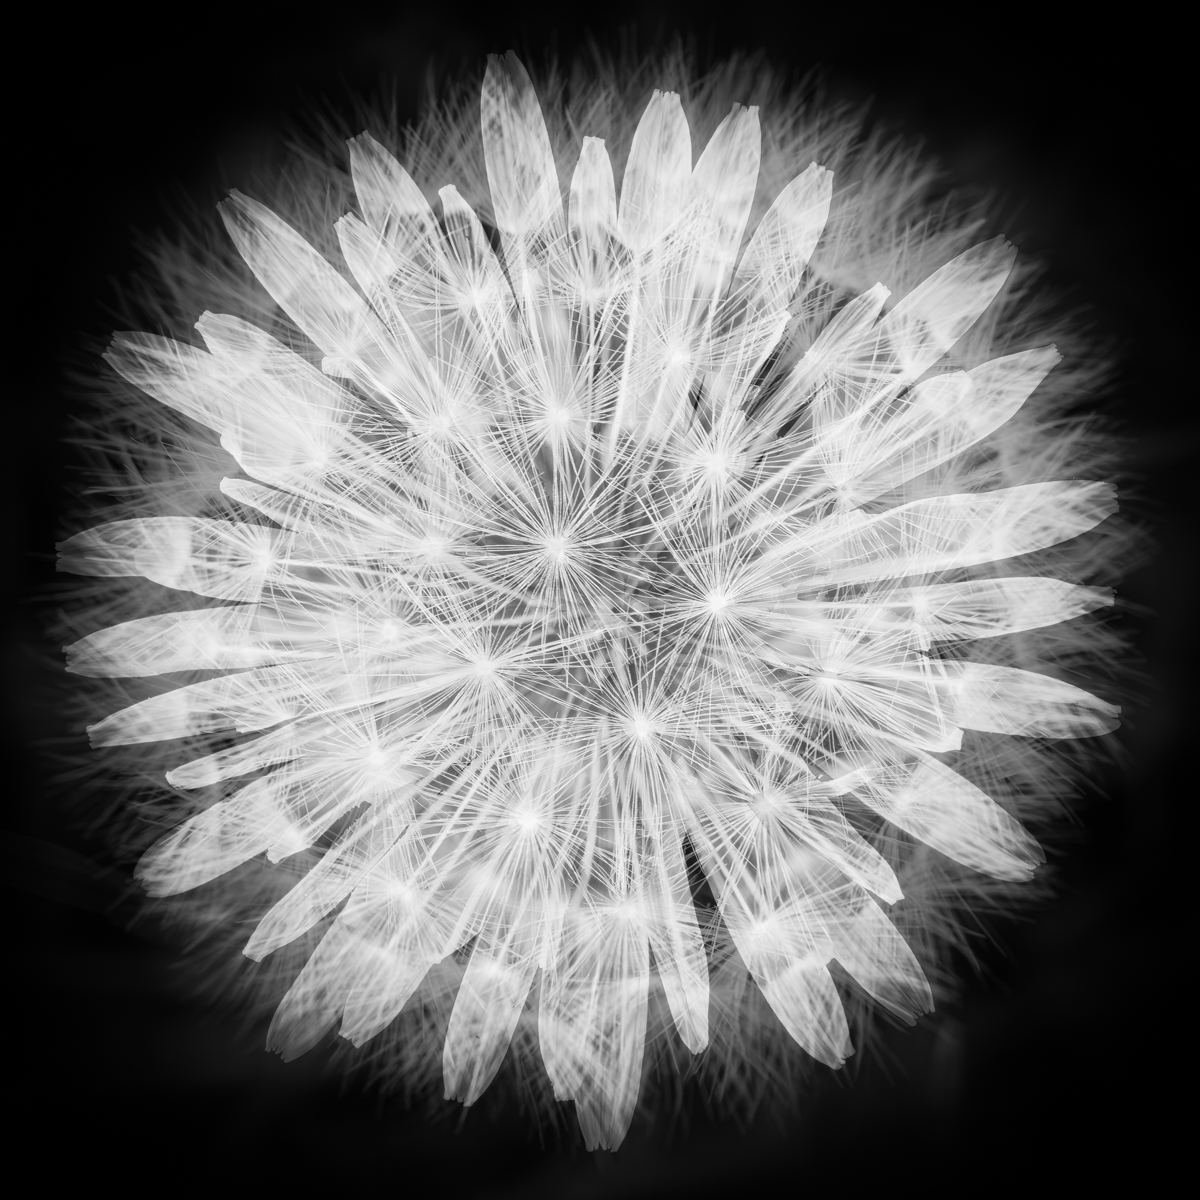 Dandelion double exposure with the images reversed from the previous post. @BNW_Macro #blackandwhitemacro #macro #ThePhotoHour #macrophotography #blackandwhitephotography #MacroHour